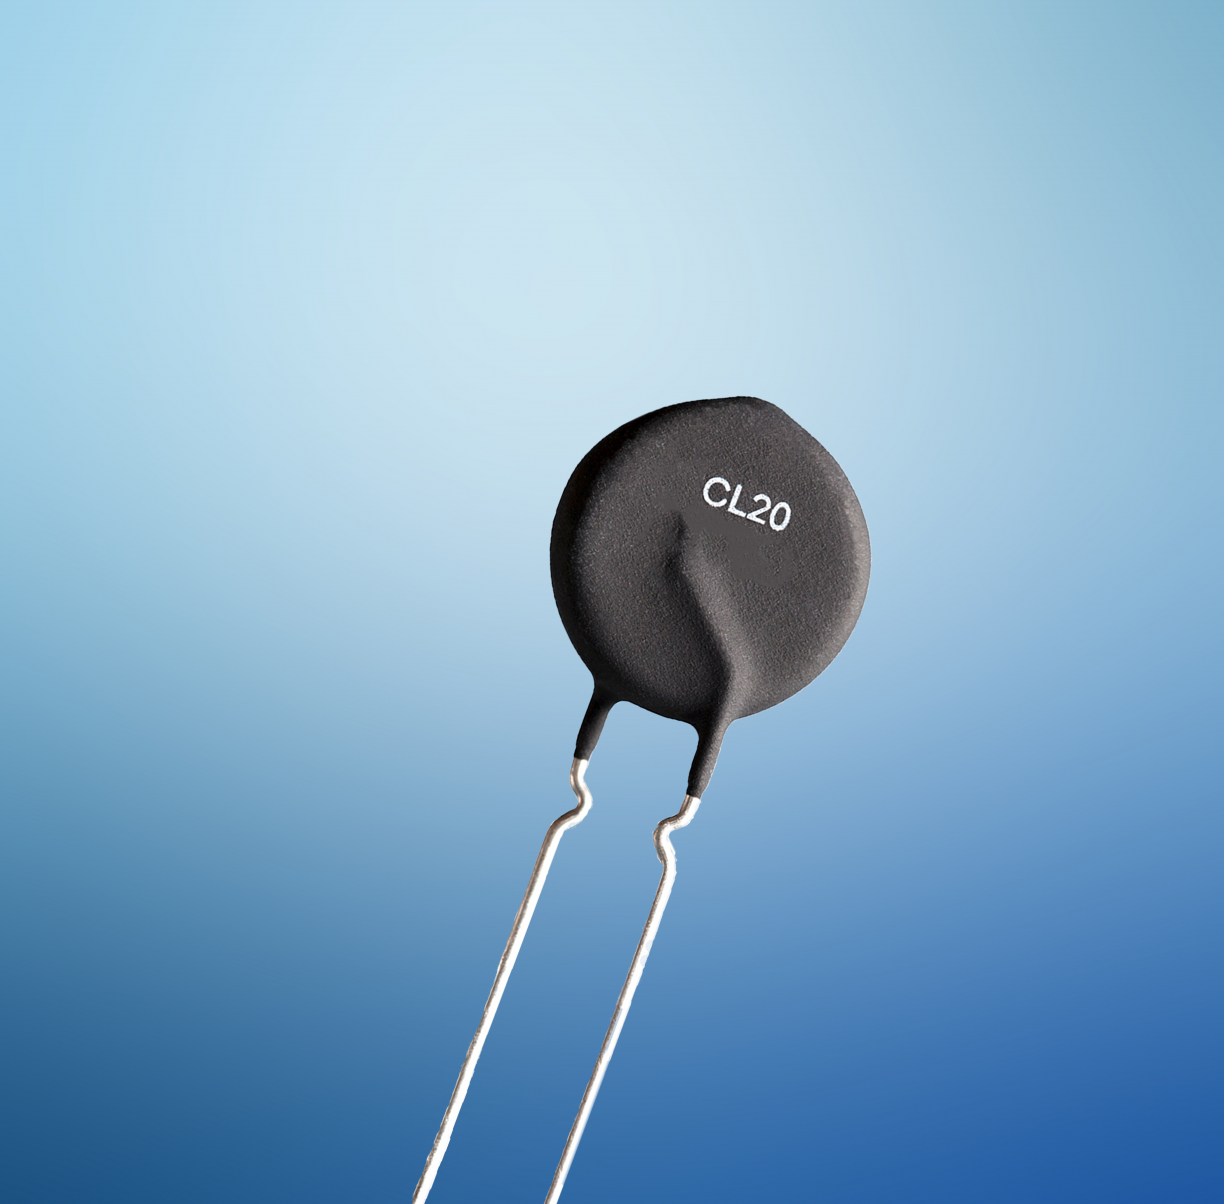 The CL20 Series of PTC thermistors provides stability and reliability in high-voltage applications